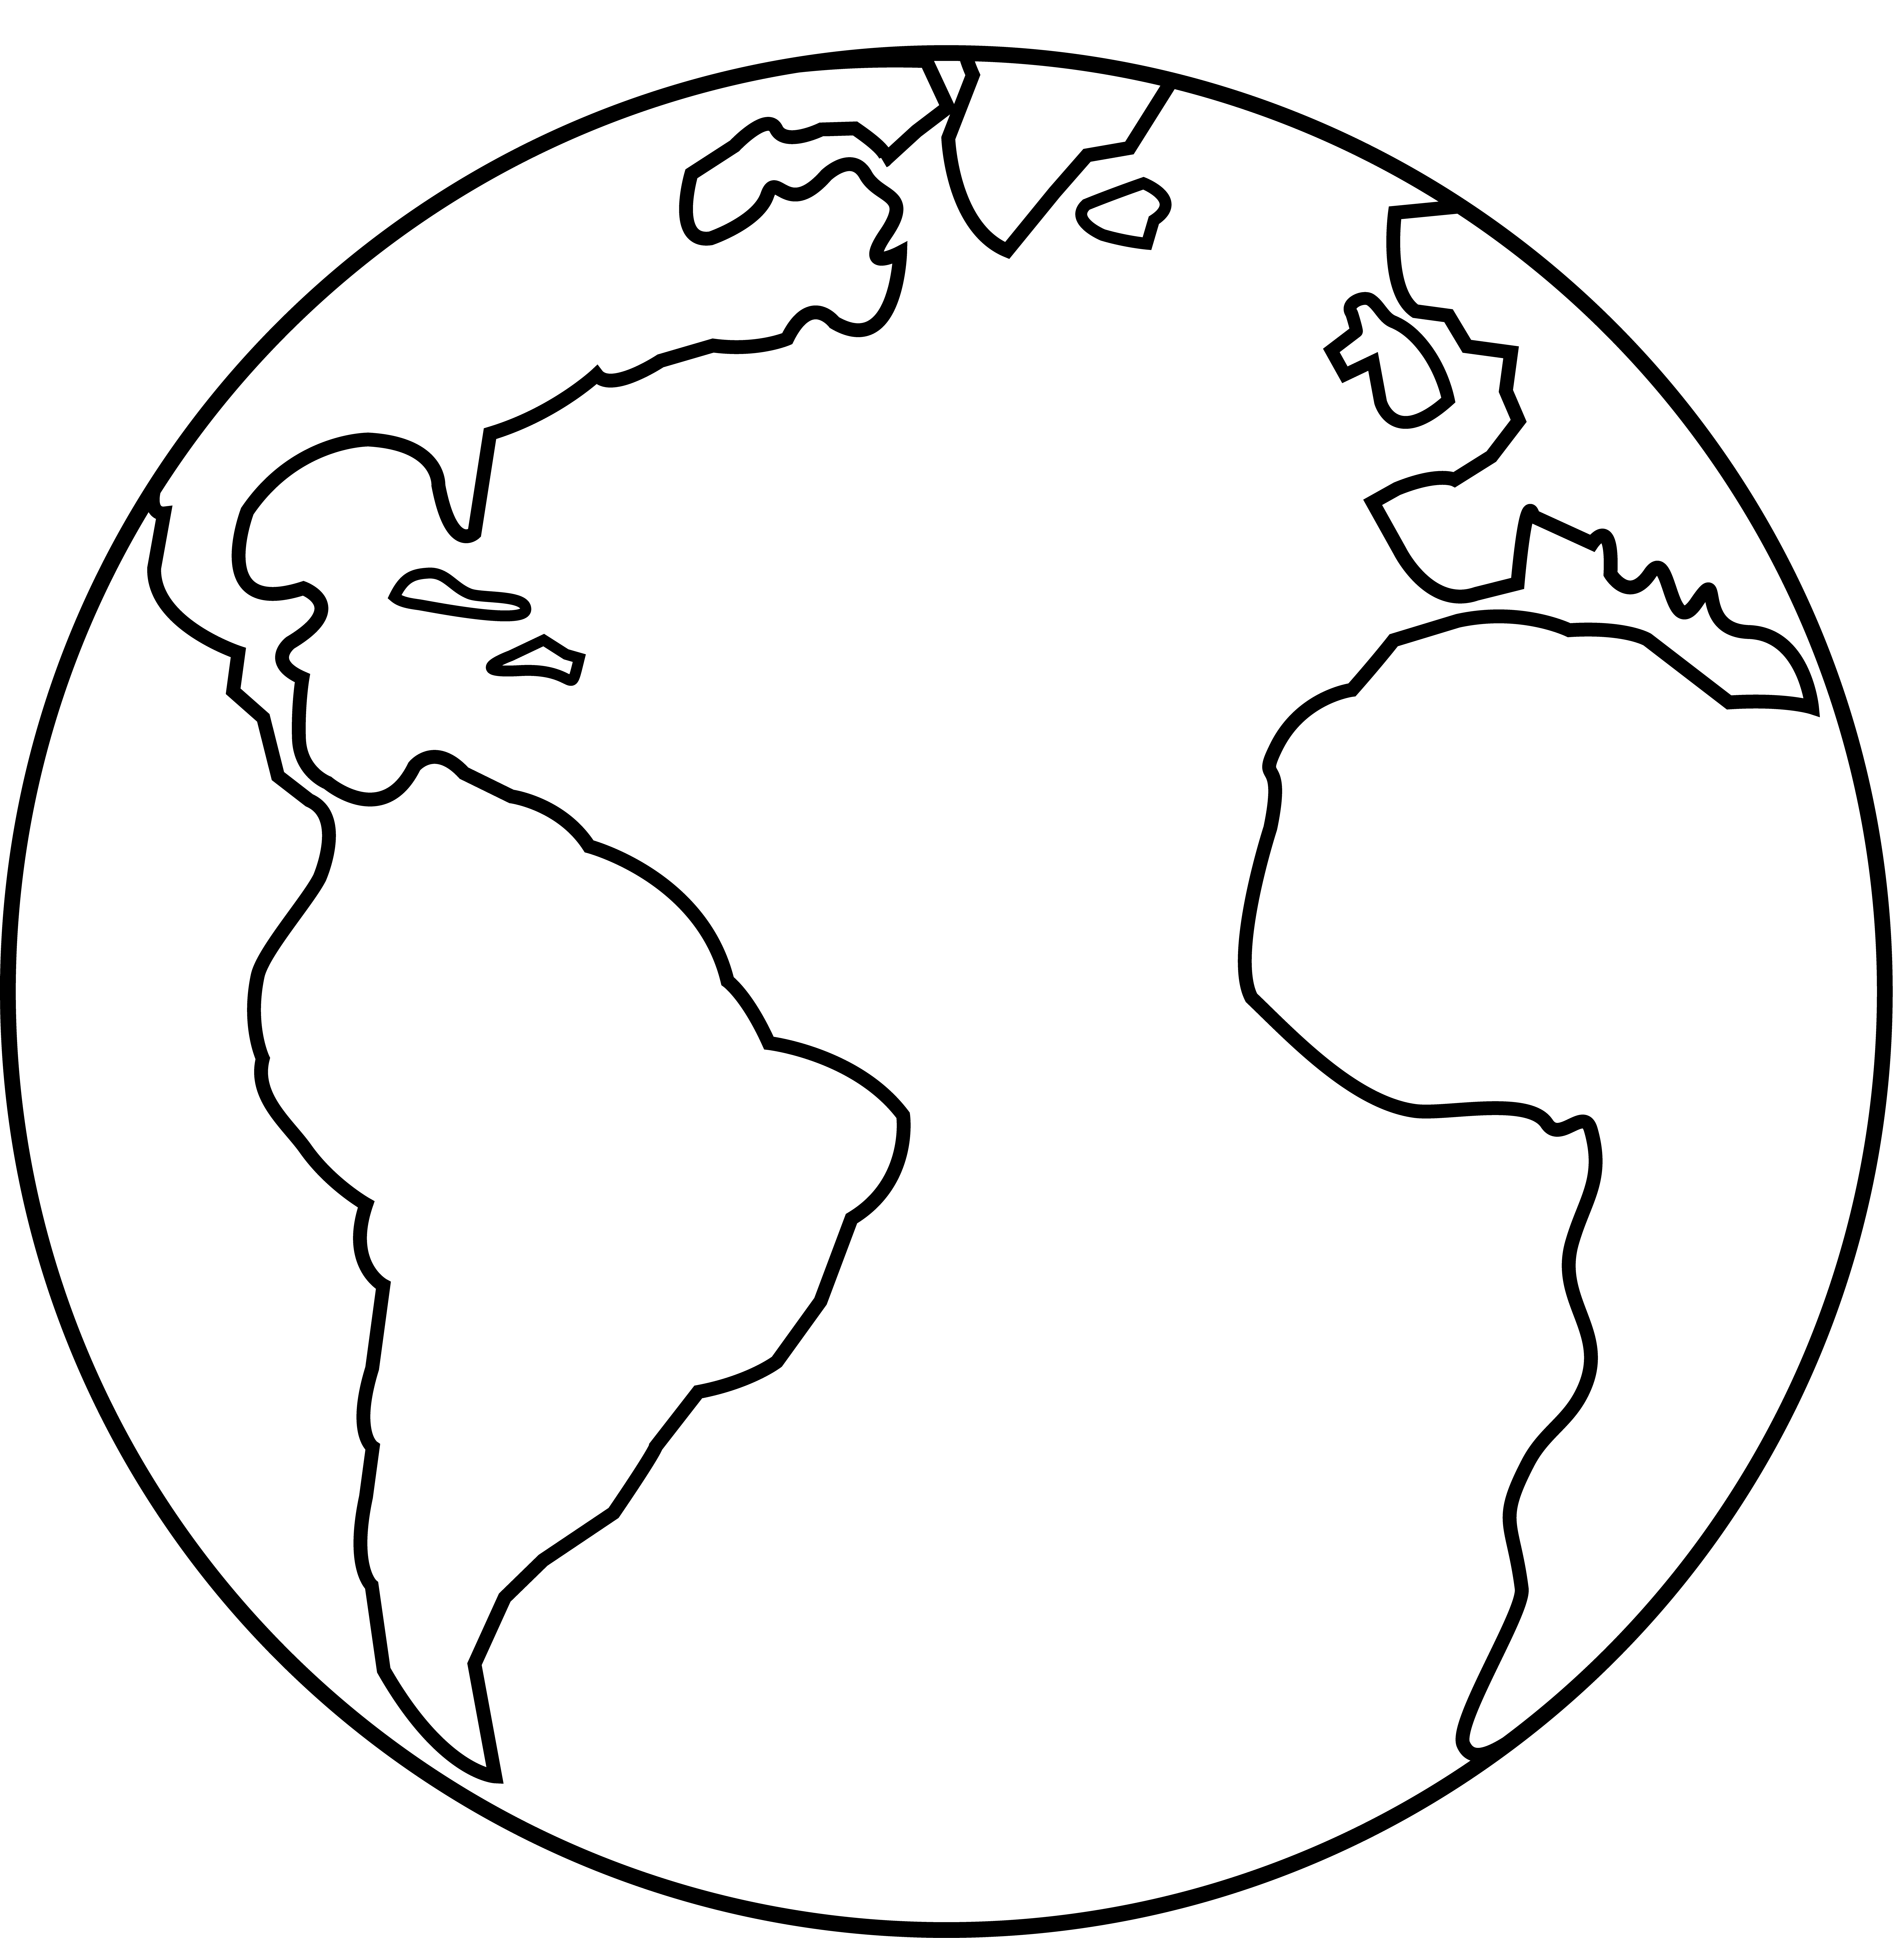 Earth clipart drawing, Earth drawing Transparent FREE for